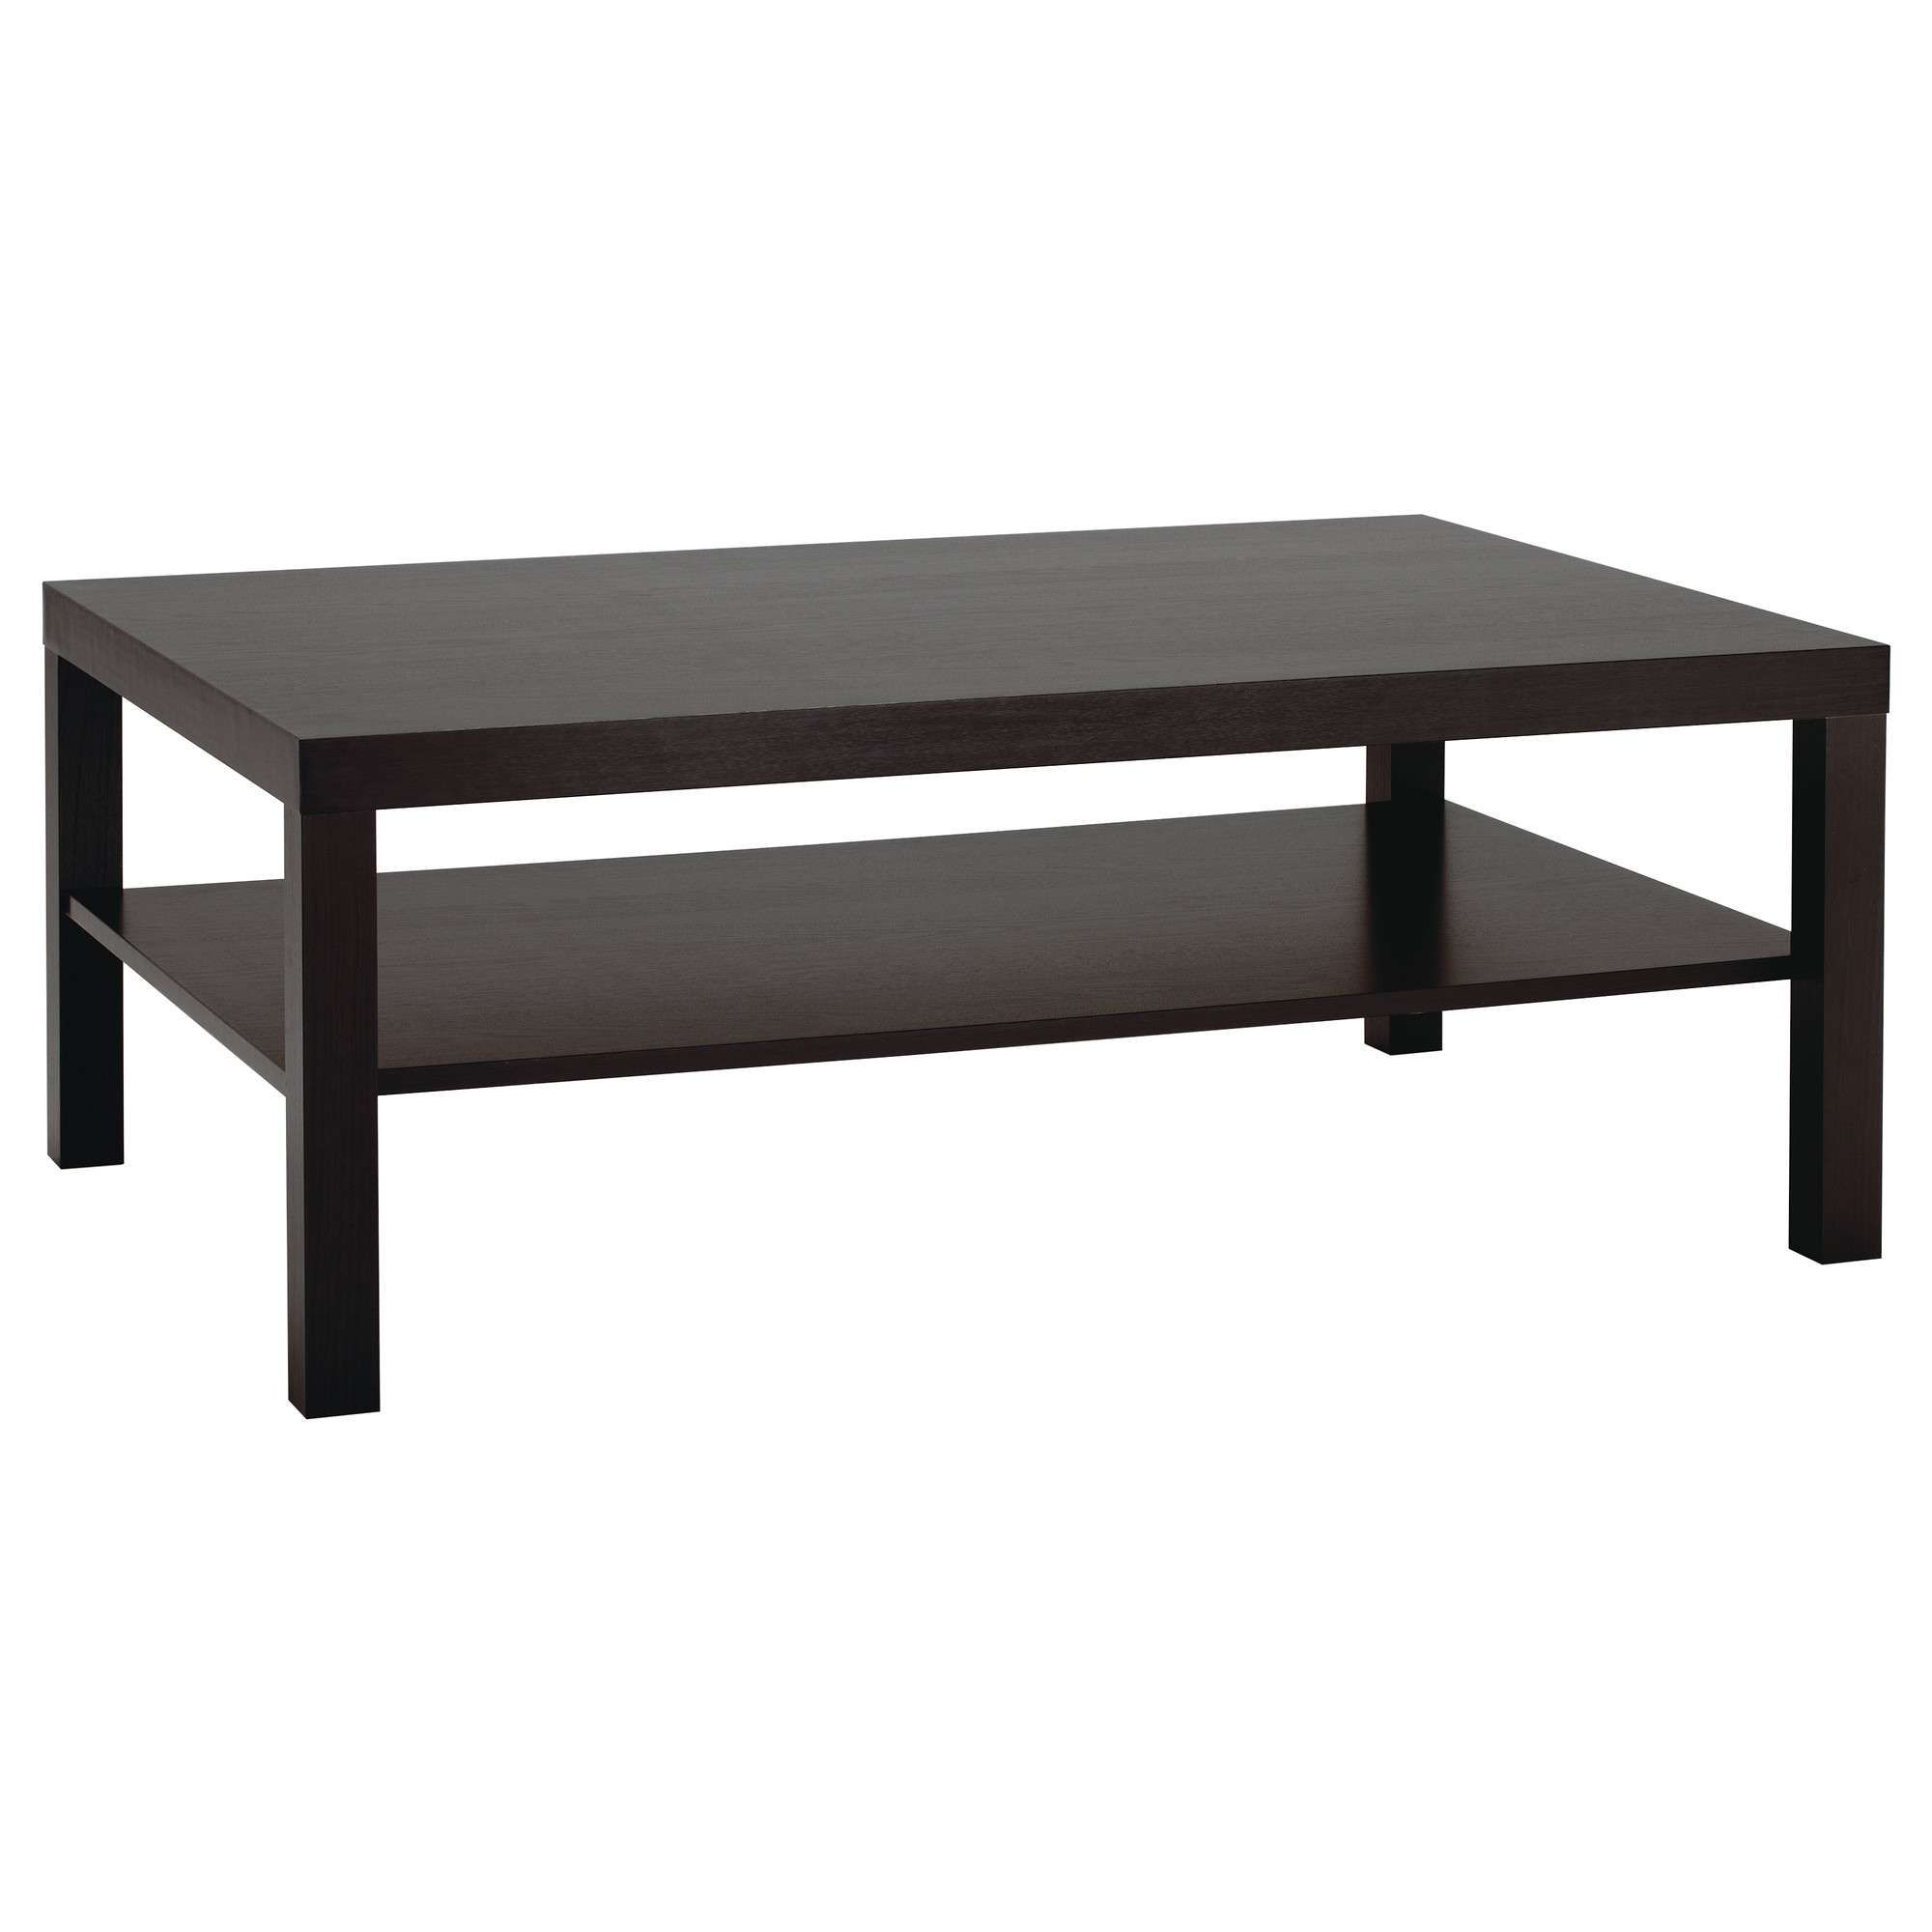 Lack Coffee Table – Black Brown – Ikea Intended For Newest Coffee Tables With Shelves (View 17 of 20)